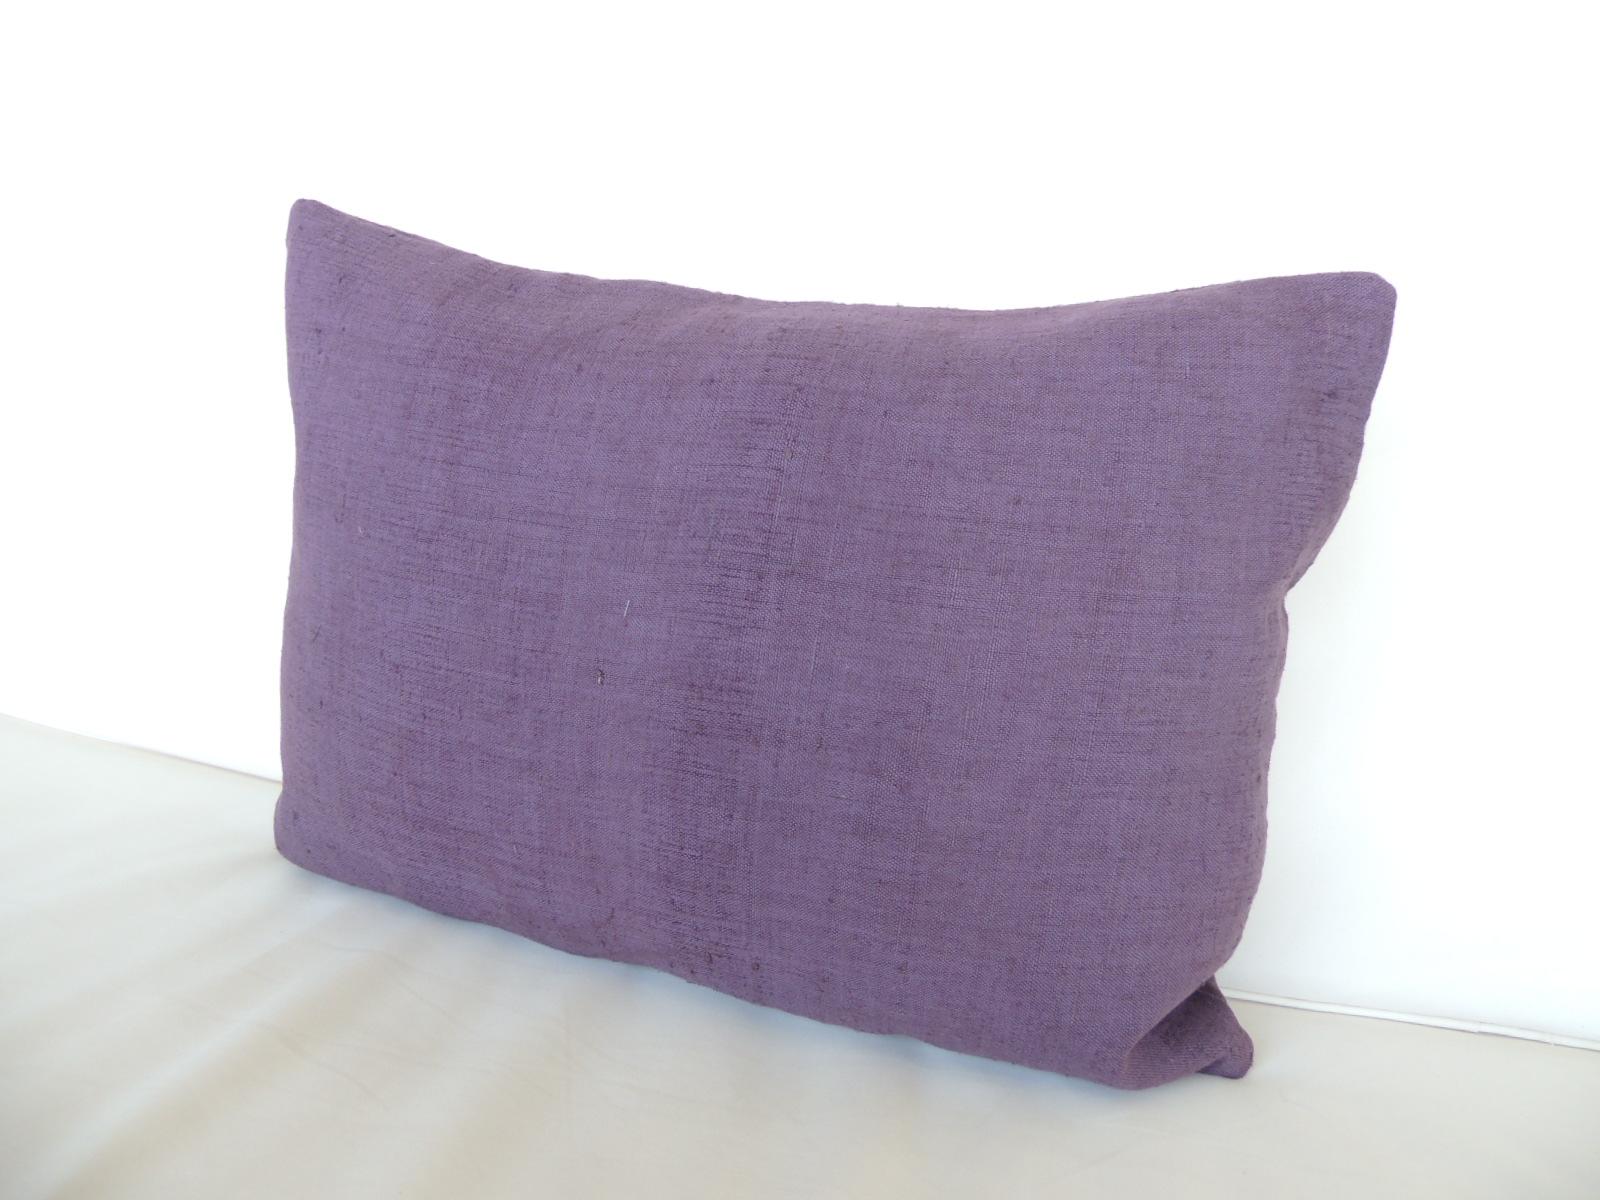 Hand-Crafted Antique Purple and White Embroidered Fez Decorative Bolster Pillow